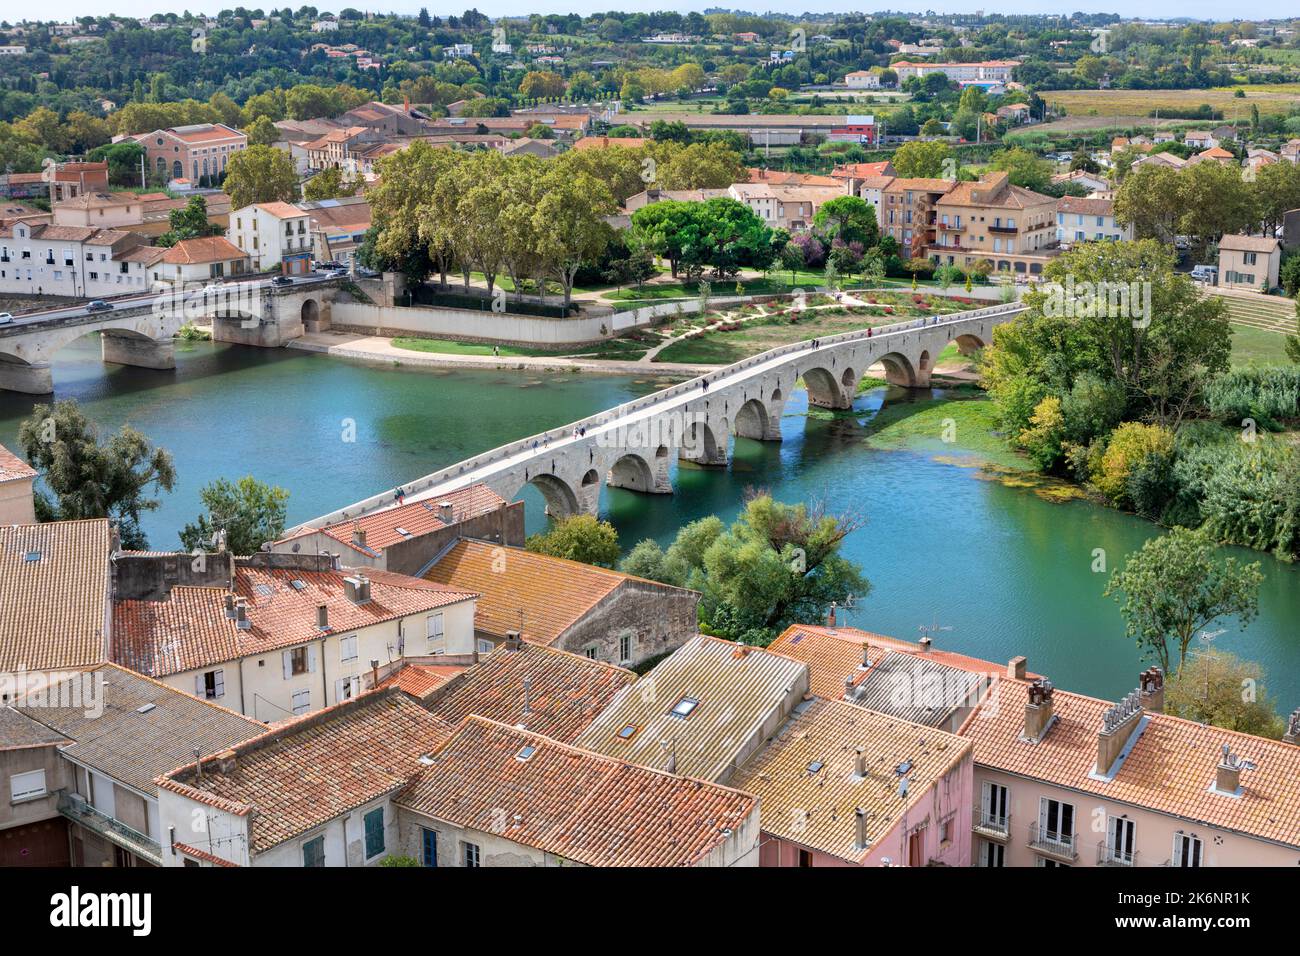 A high level view of Pont Vieux, Beziers, France. Stock Photo